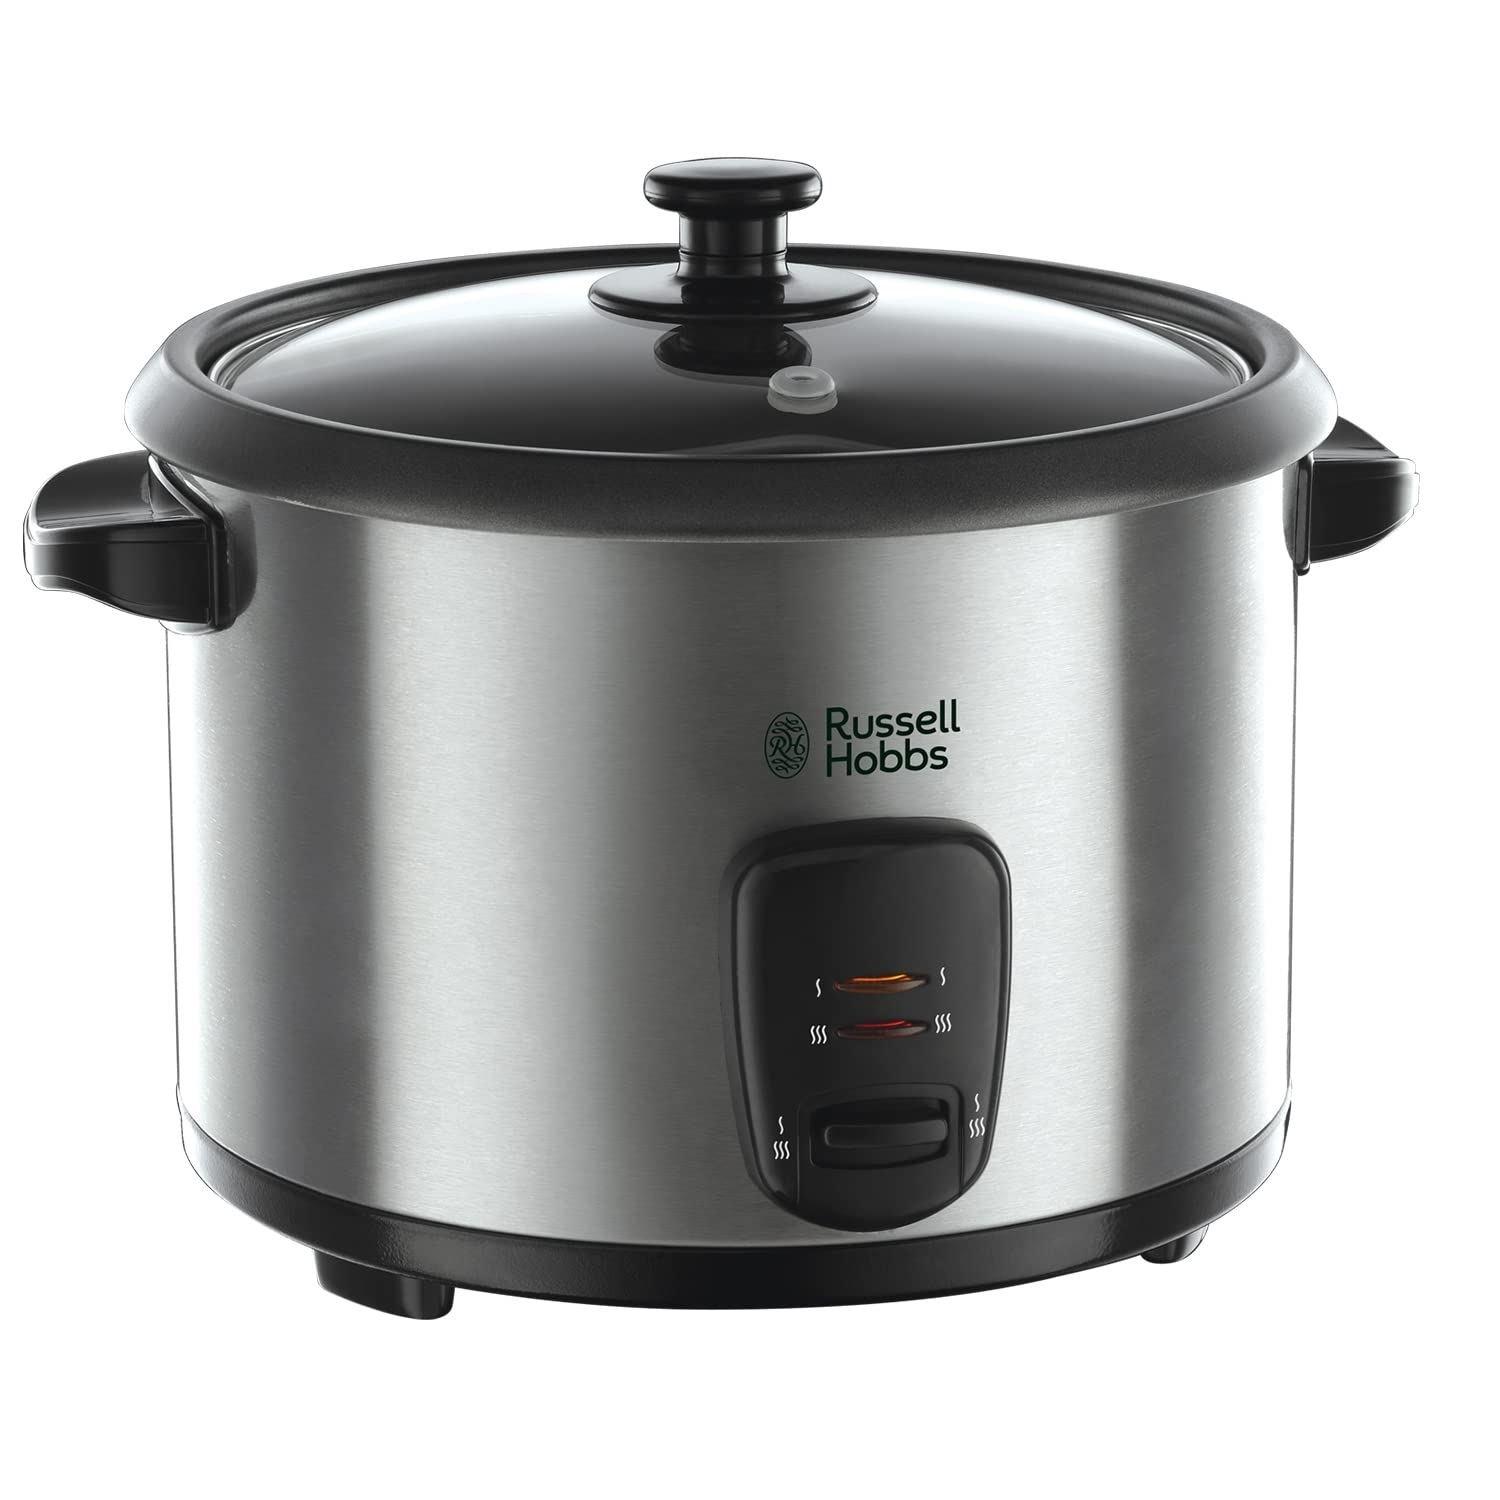 Russell Hobbs 19750 1.8 Litre Rice Cooker - Stainless Steel